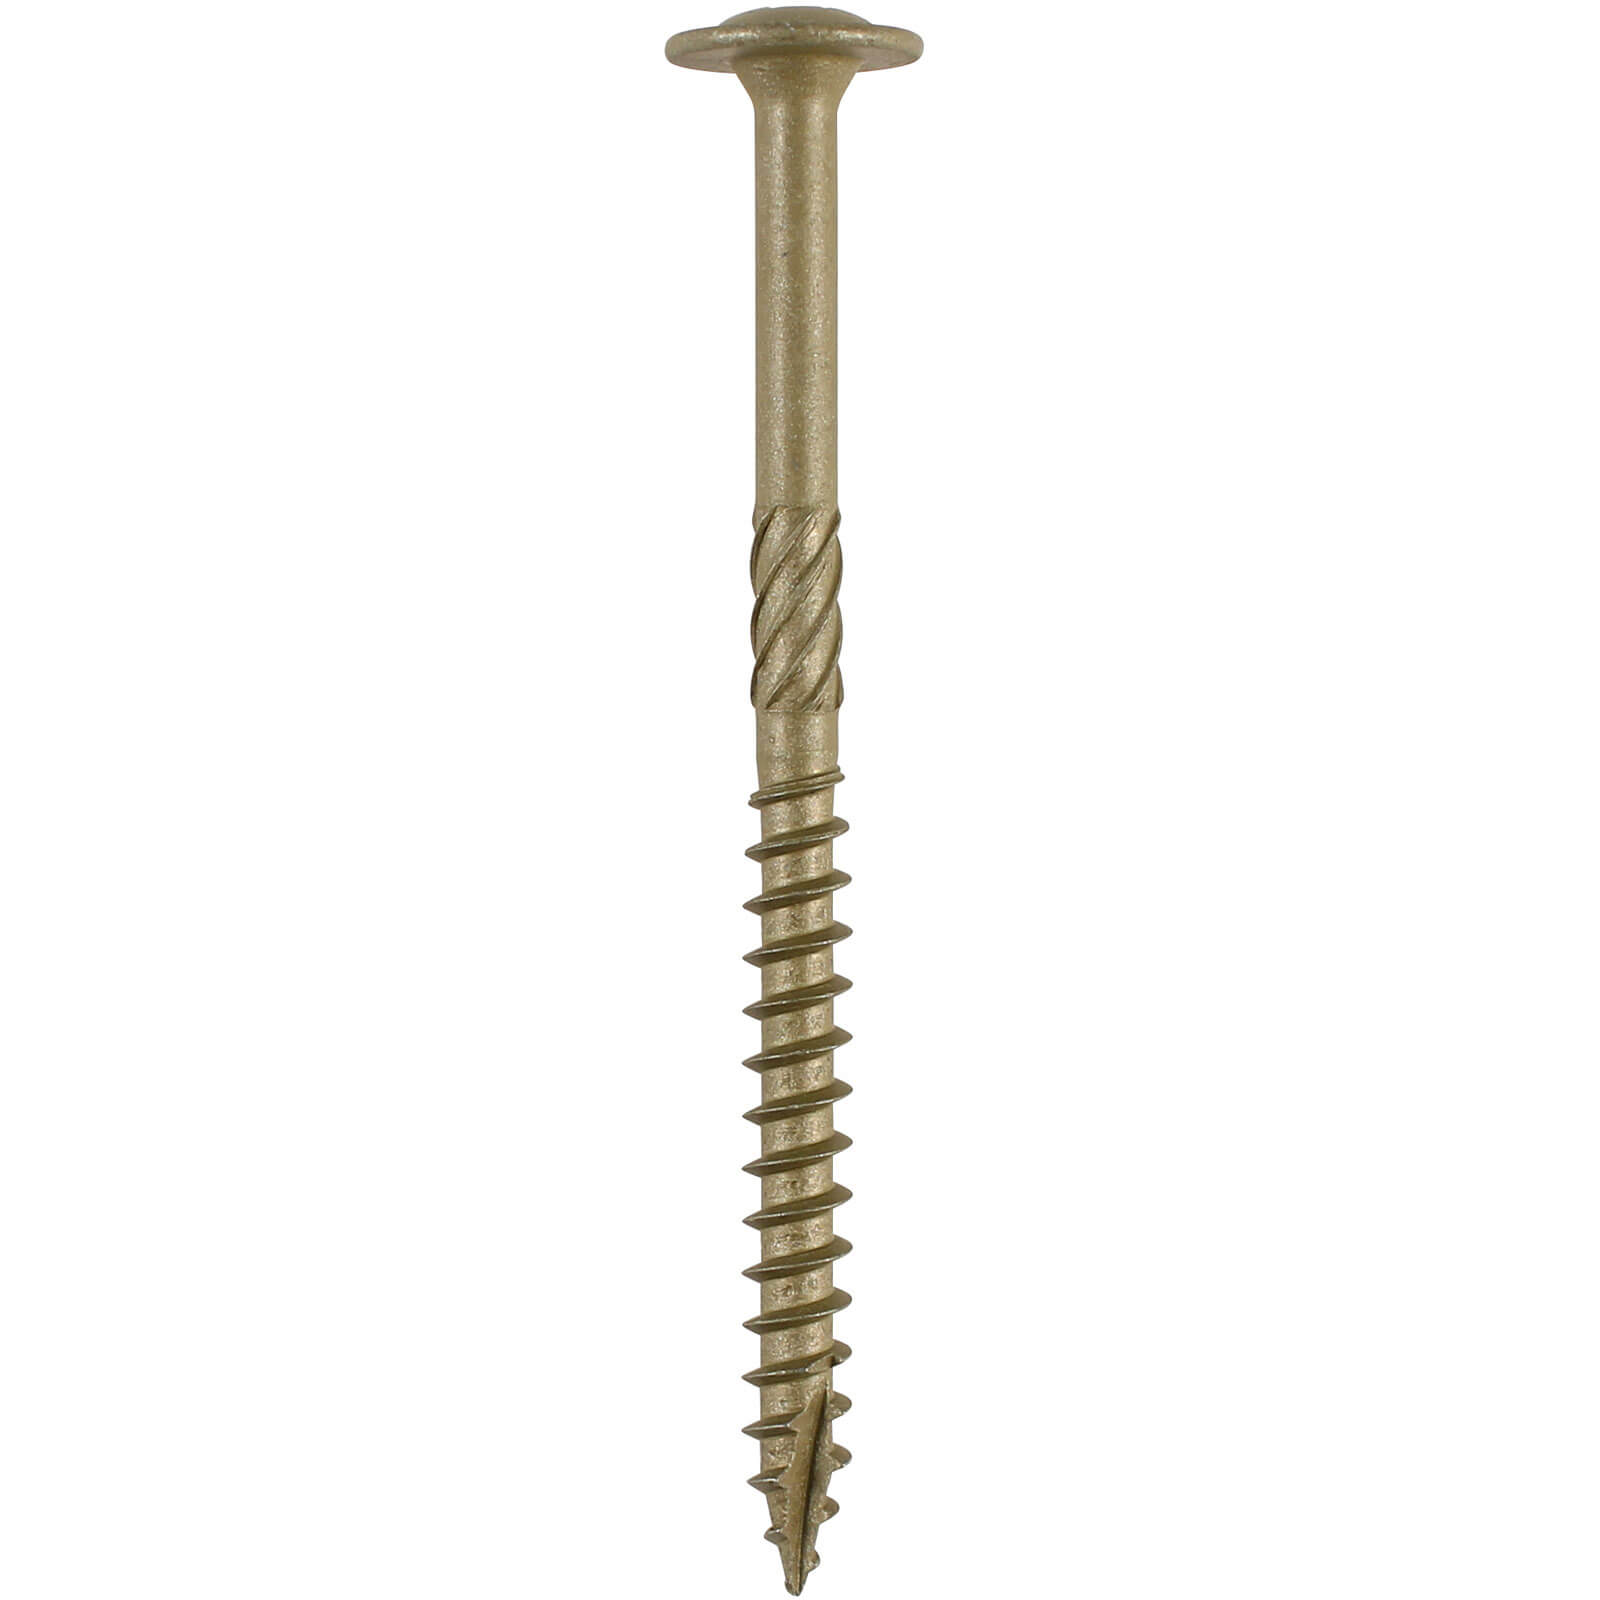 Photos - Nail / Screw / Fastener TIMCO Wafer Torx Head Index Wood Screws 8mm 250mm Pack of 50 250INW 